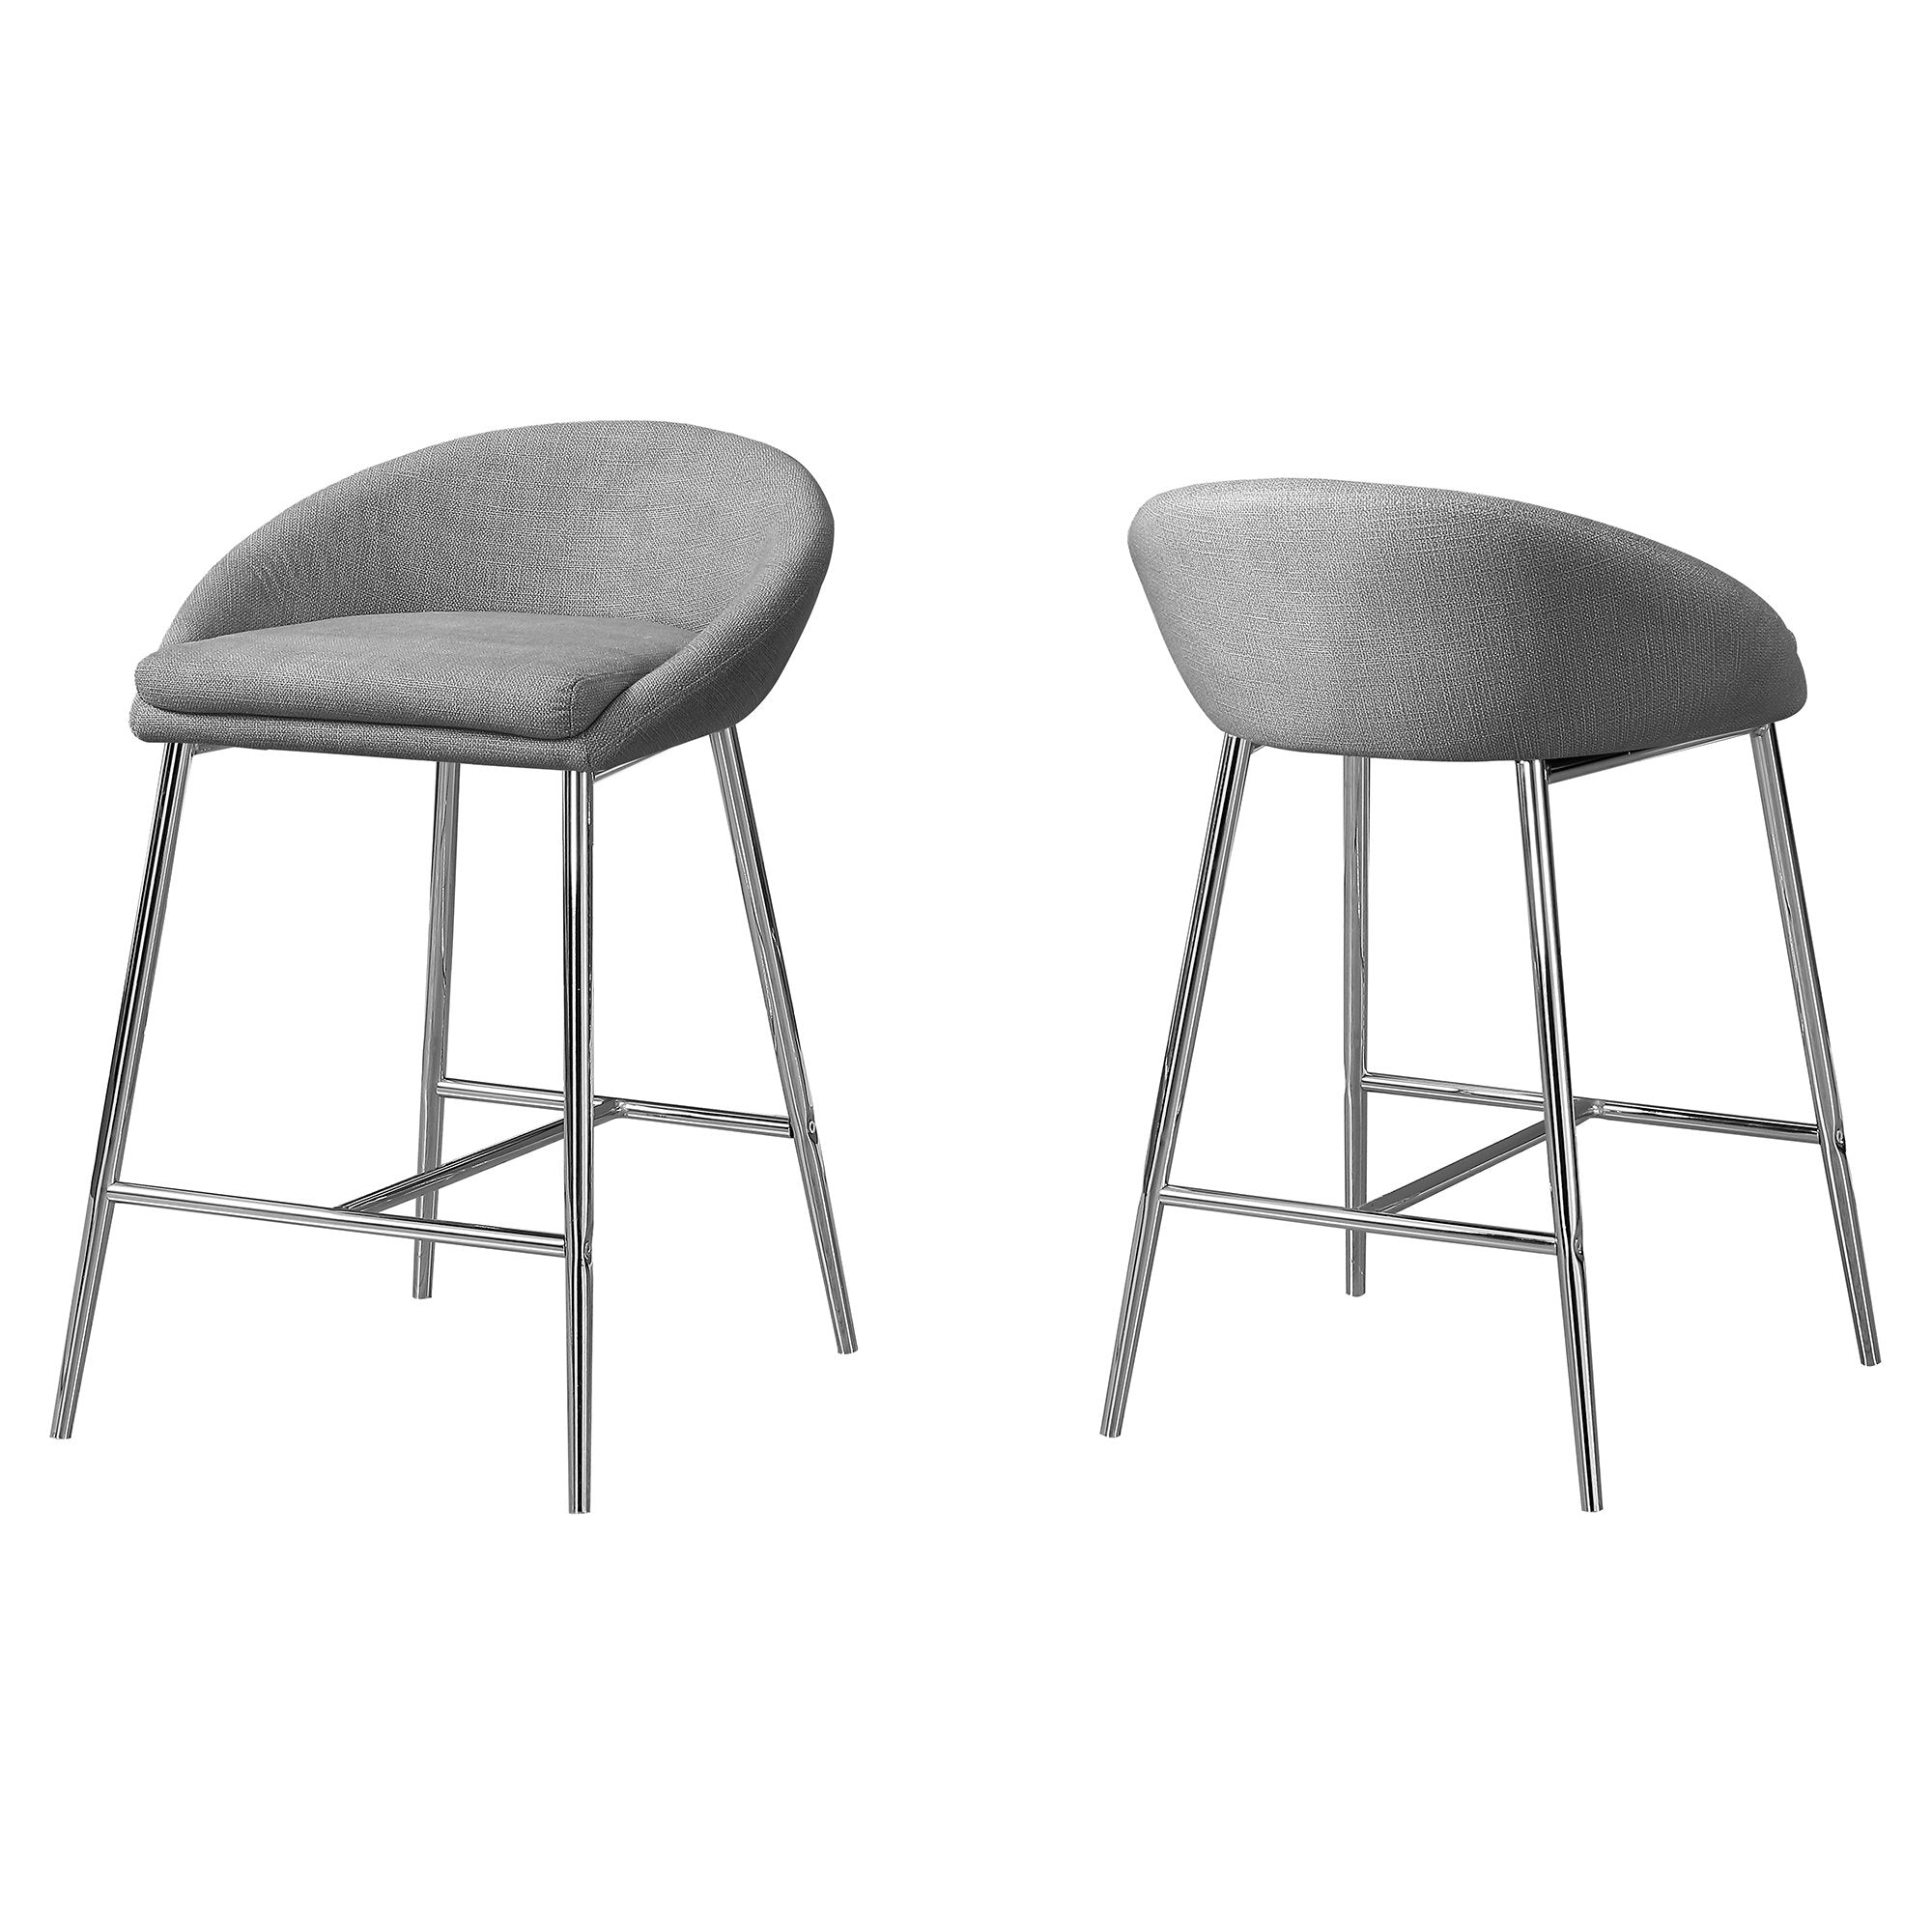 MN-702298    Bar Stool, Set Of 2, Counter Height, Kitchen, Metal, Leather Look, Grey, Chrome, Contemporary, Modern